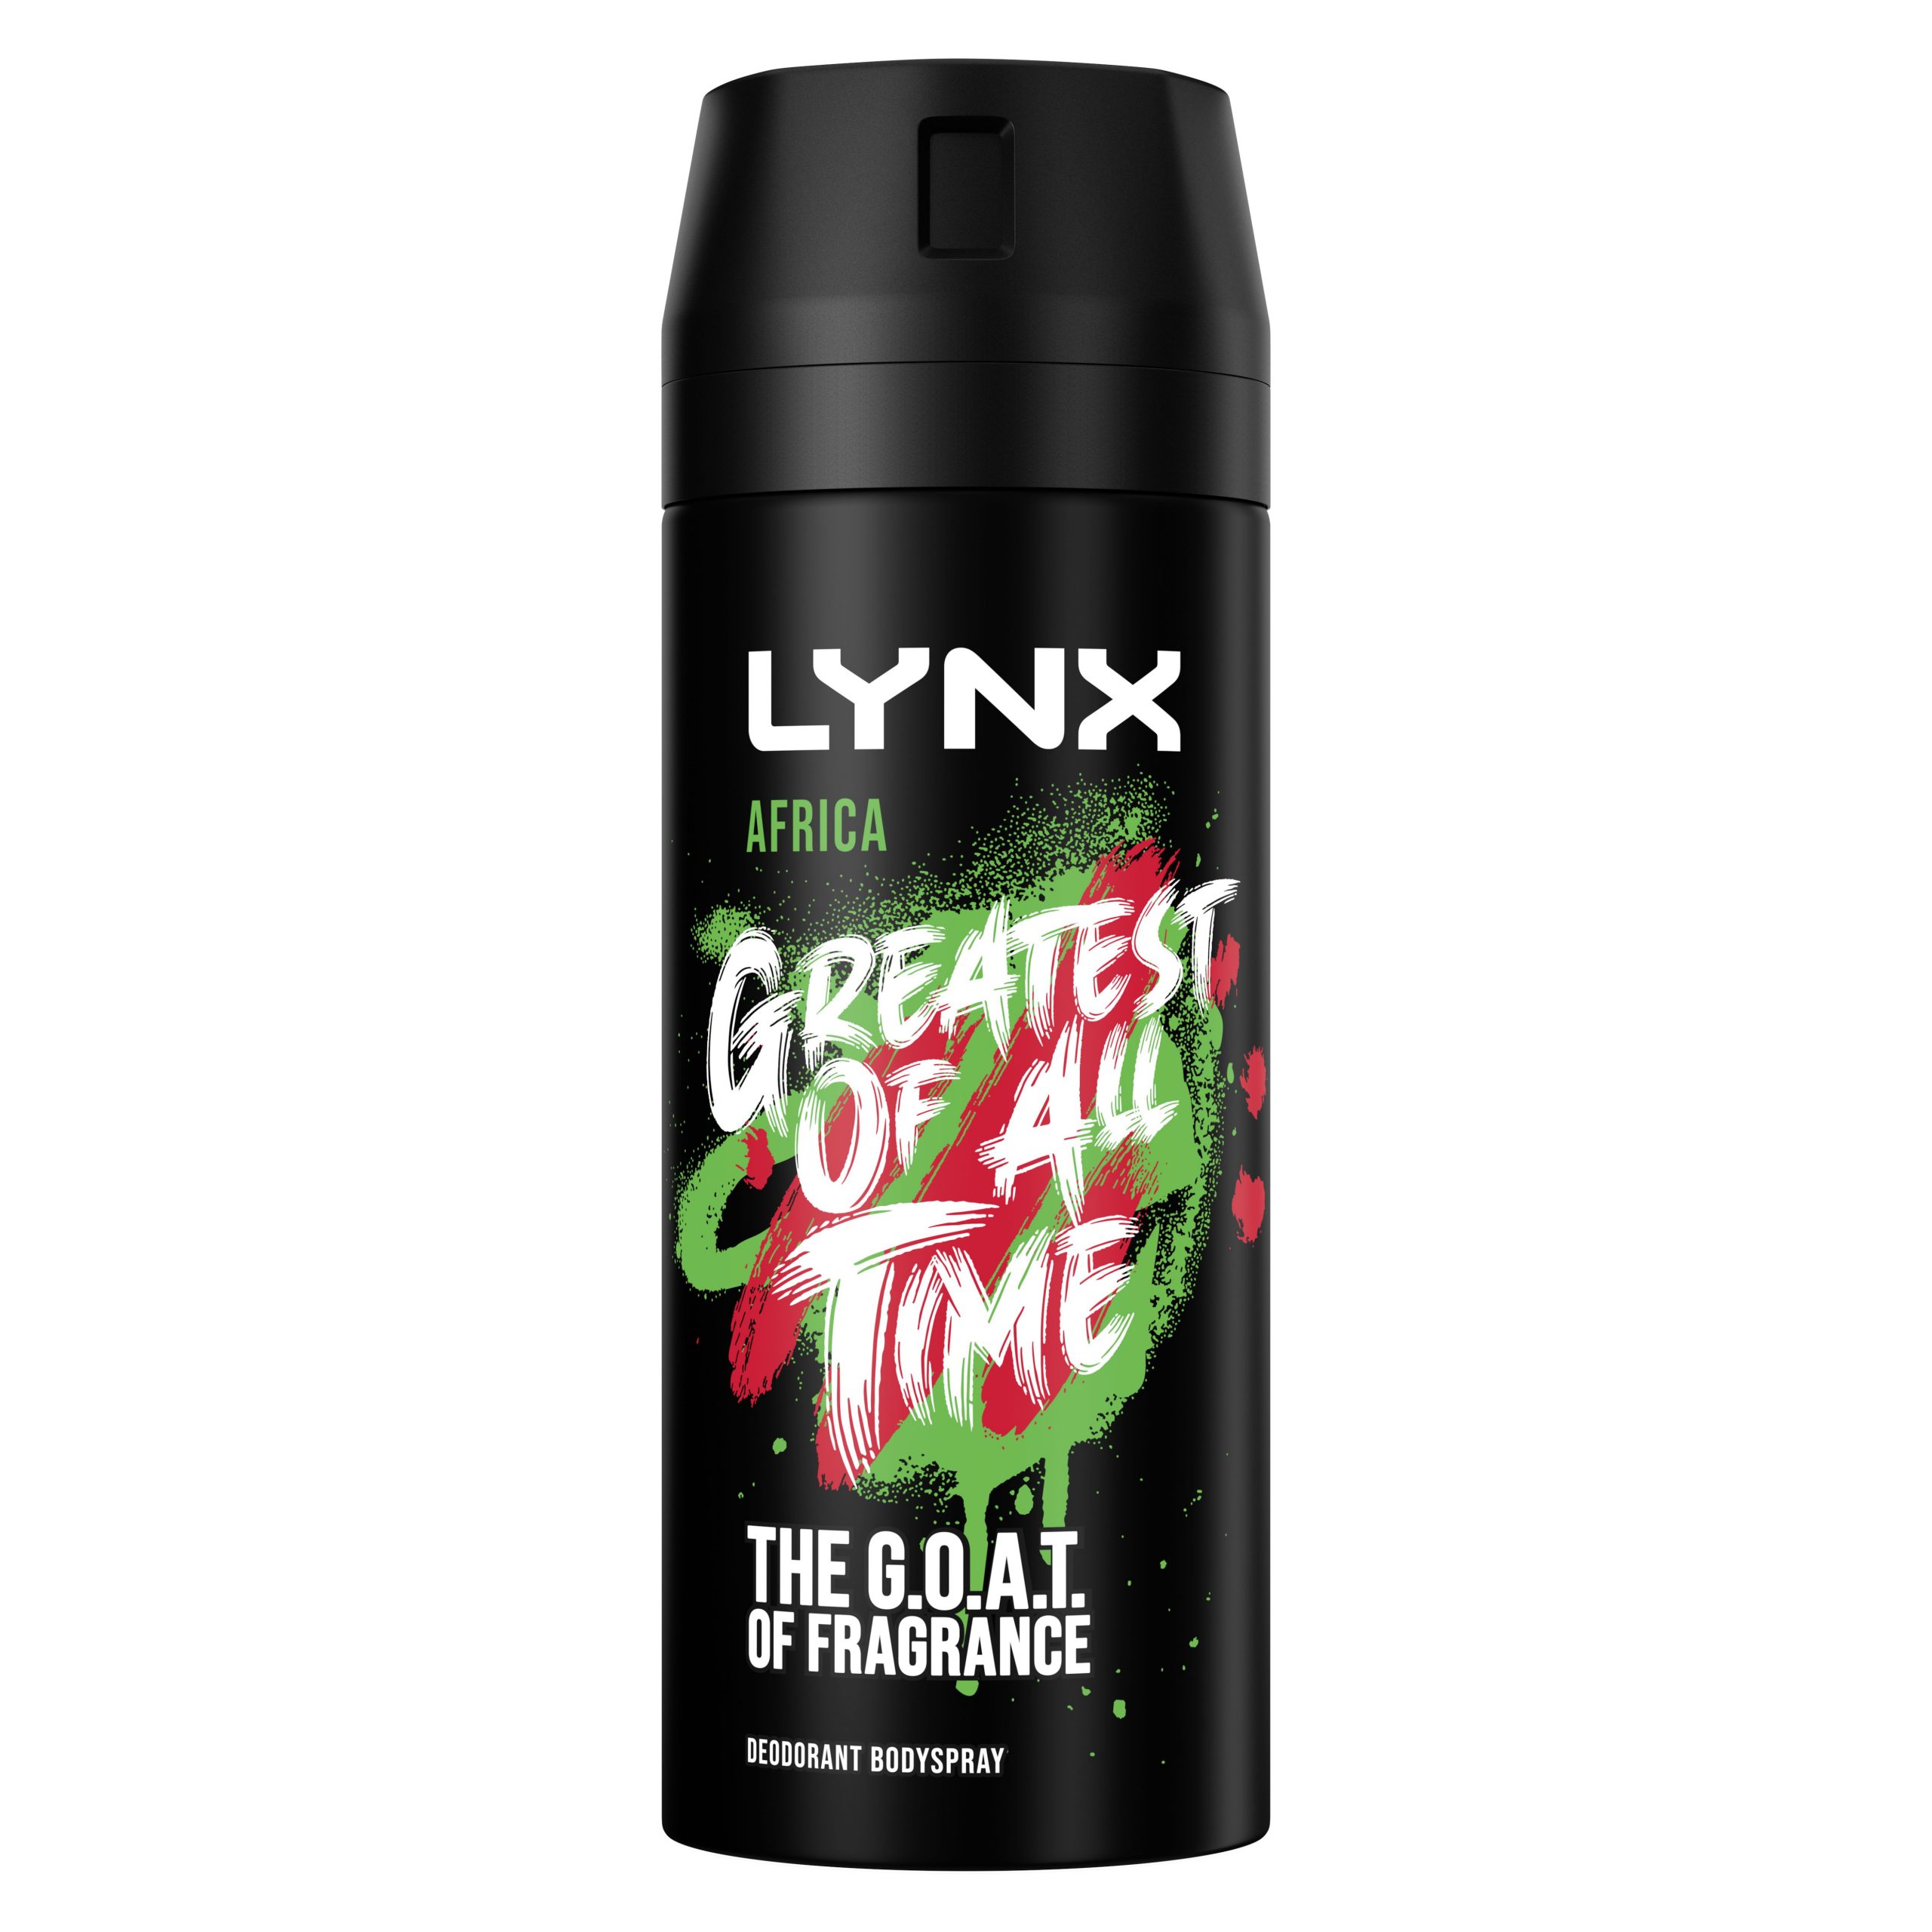 Lynx recruits next generation of shoppers with ‘G.O.A.T’ status Africa variant